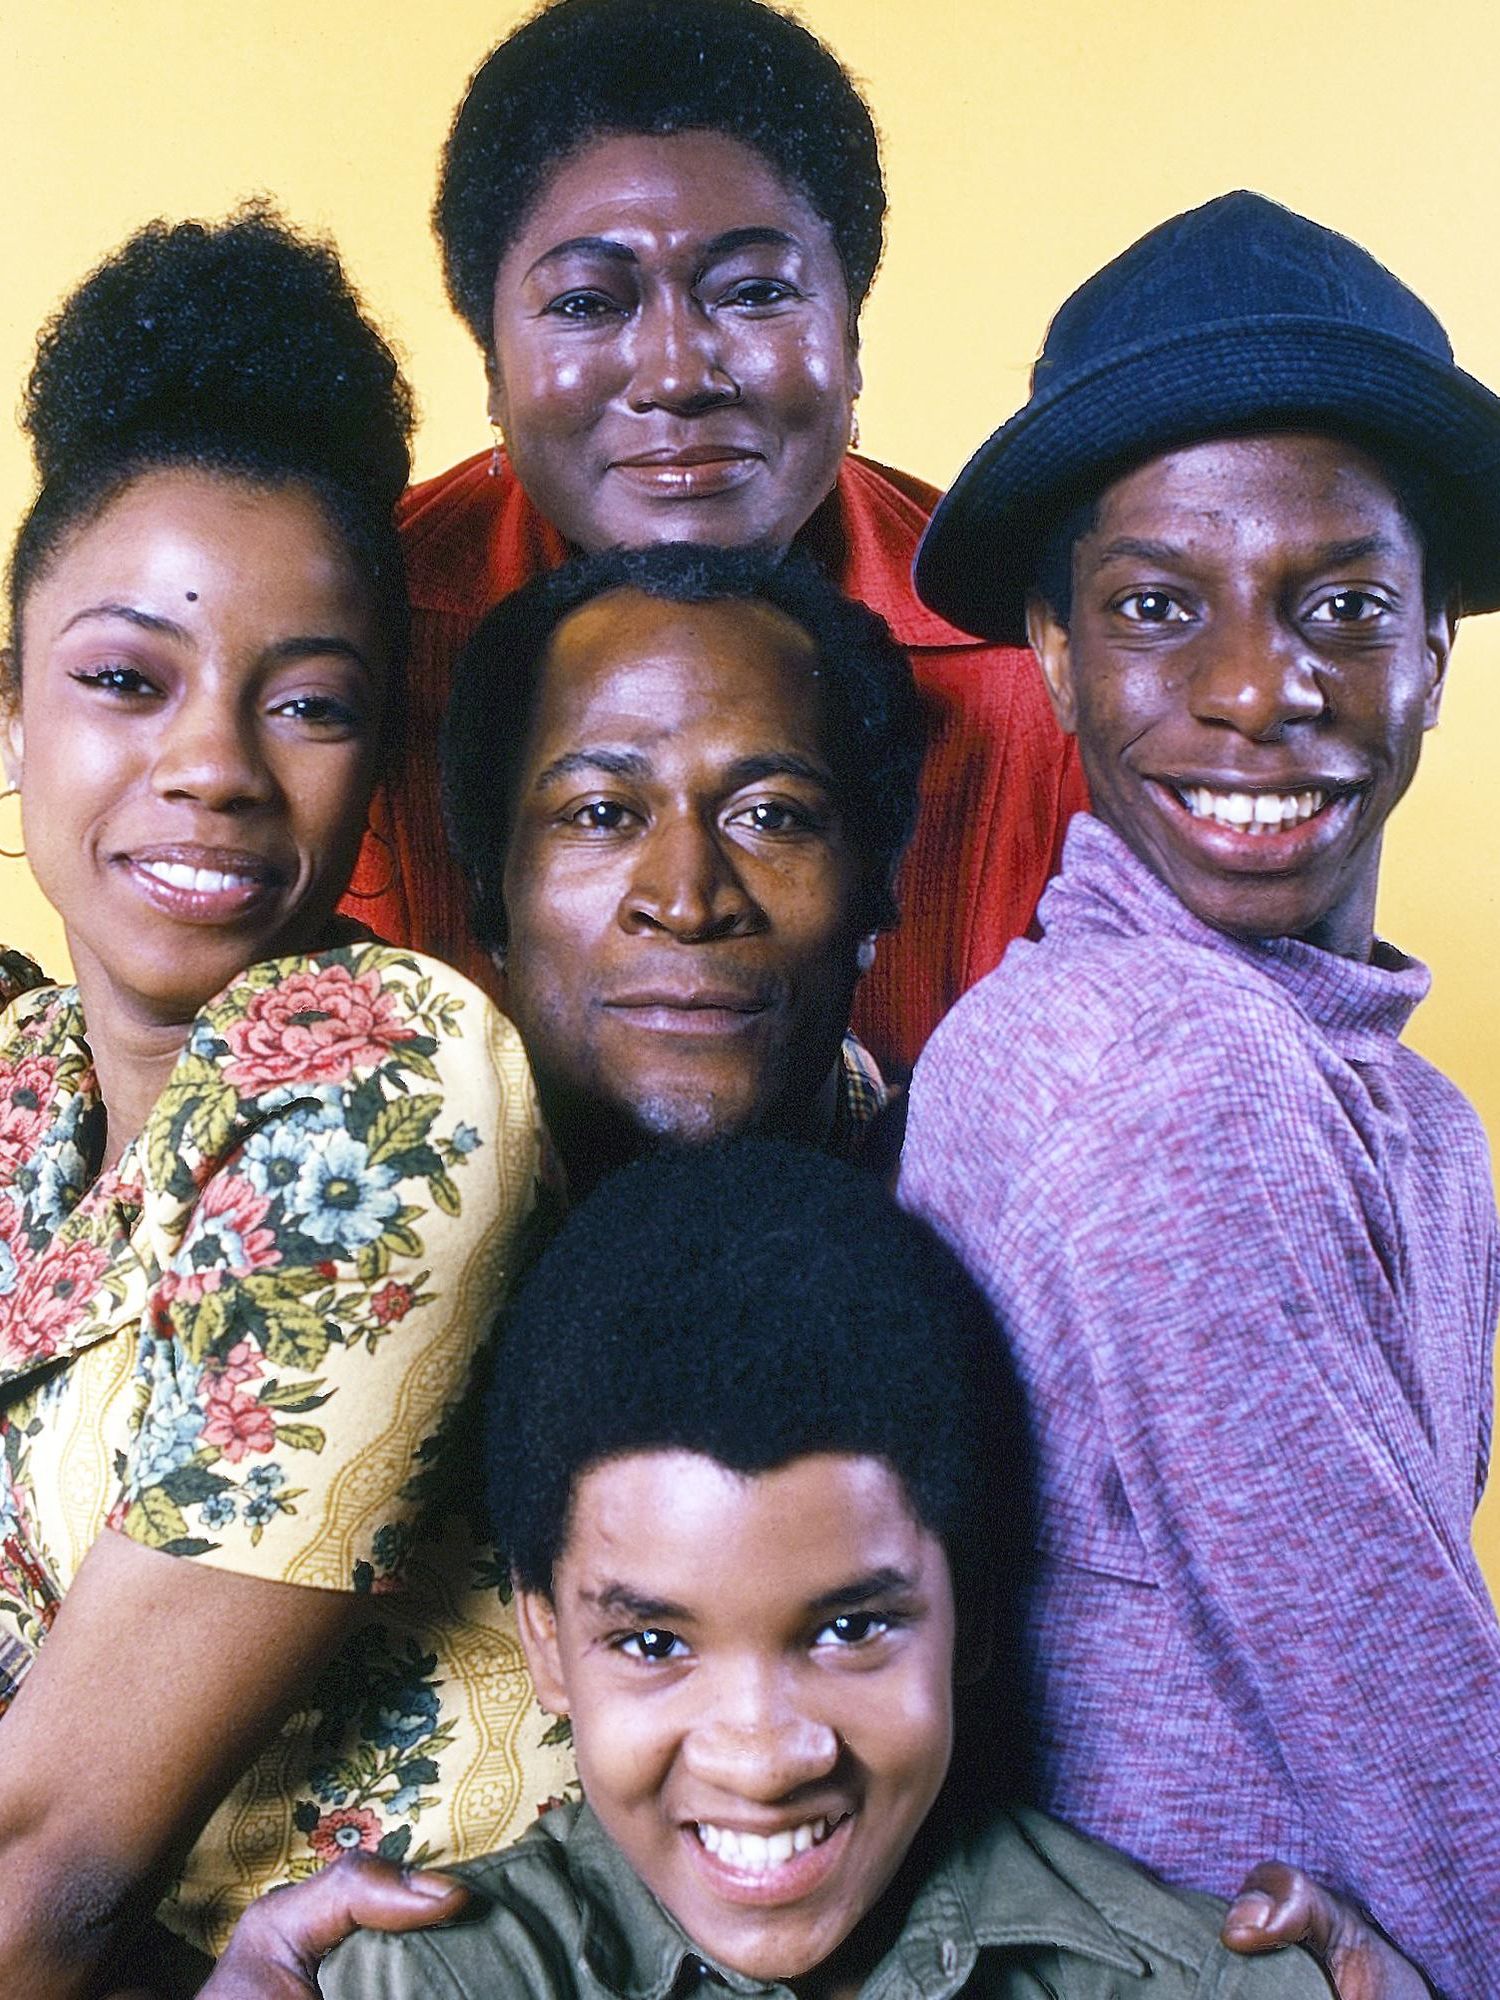 The stars of Good Times pose for a family portrait with John Amos in the center.